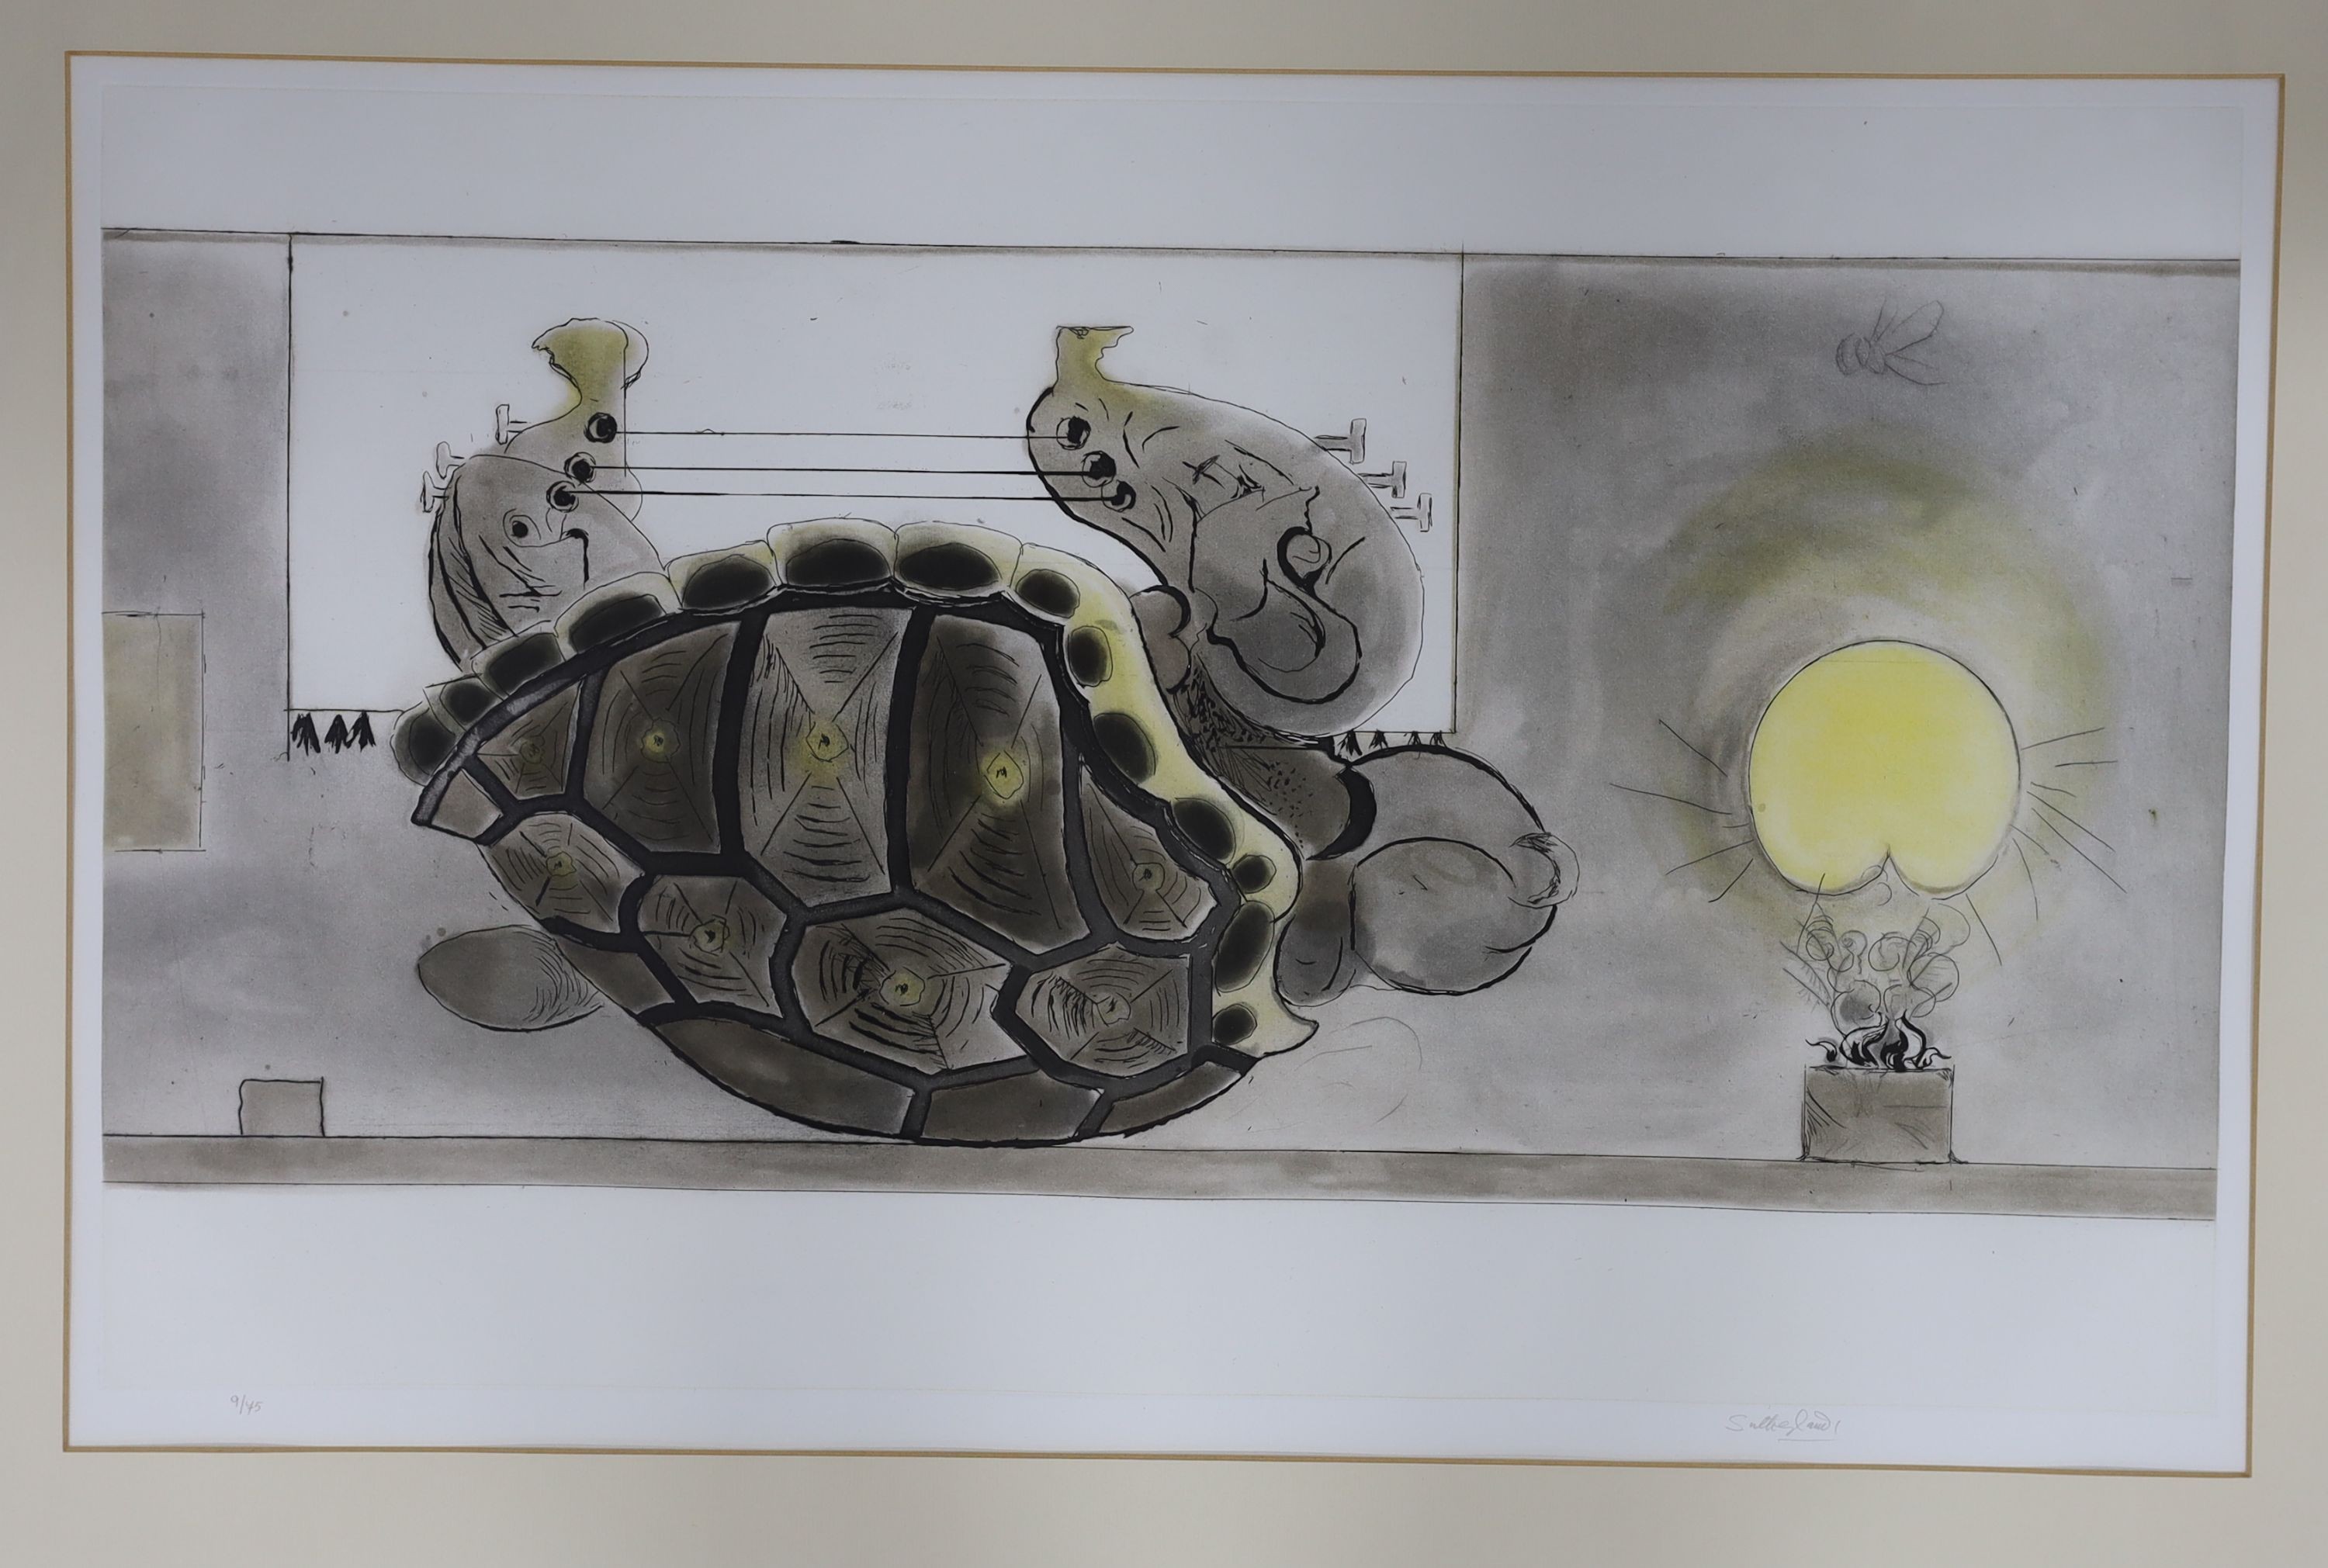 Graham Sutherland (1903-1980), etching with aquatint, The Tortoise, from The Apollinaire Le Bestiaire Suite 1978, signed, 9/75, 45 x 73cm